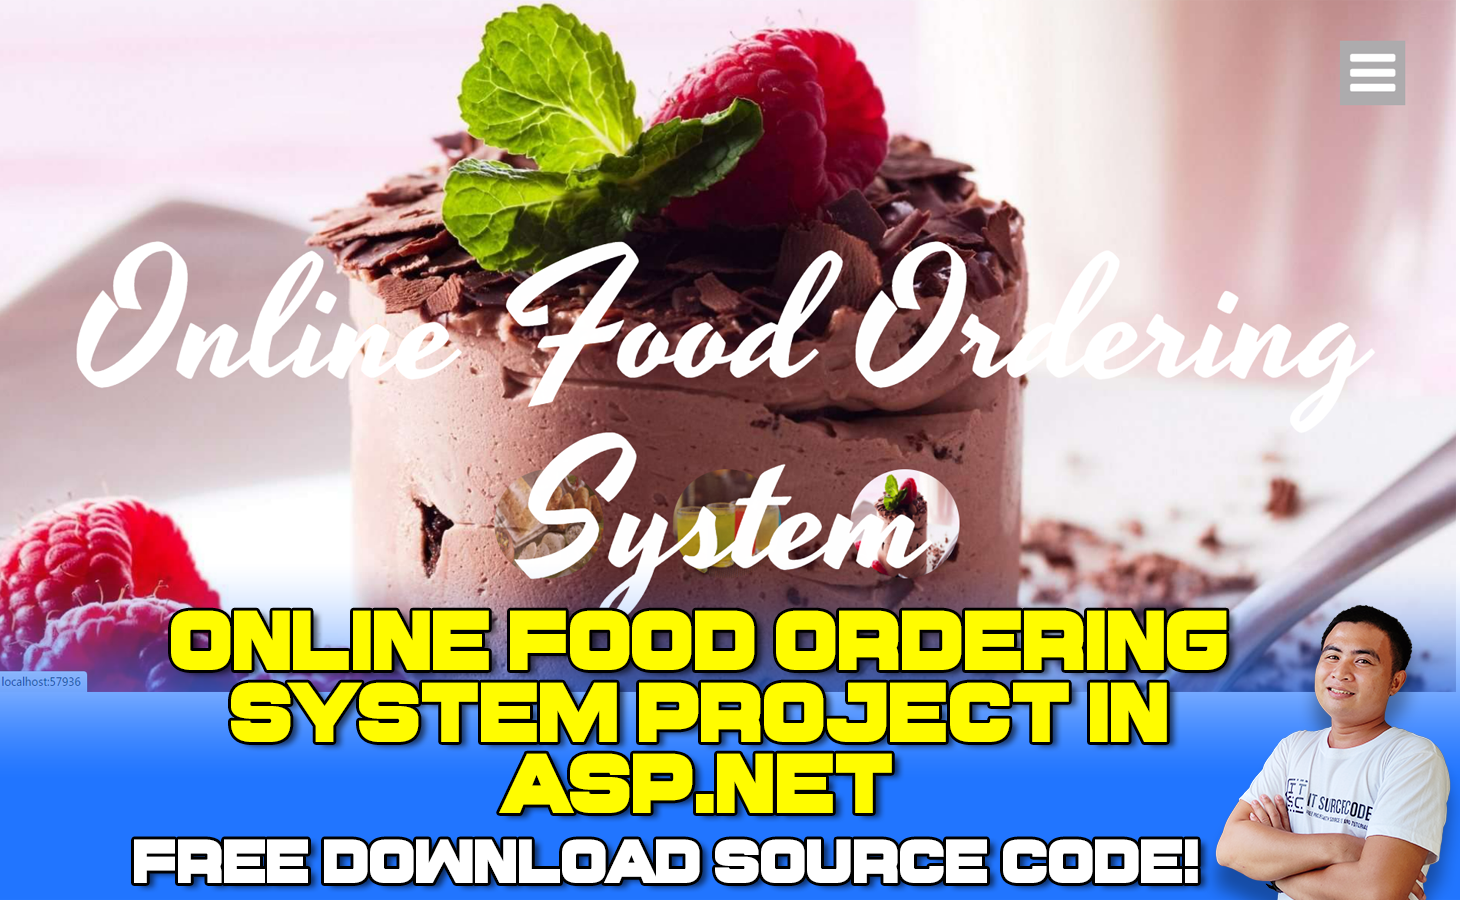 Online Food Ordering System Project In ASP net FREE Download Source Code